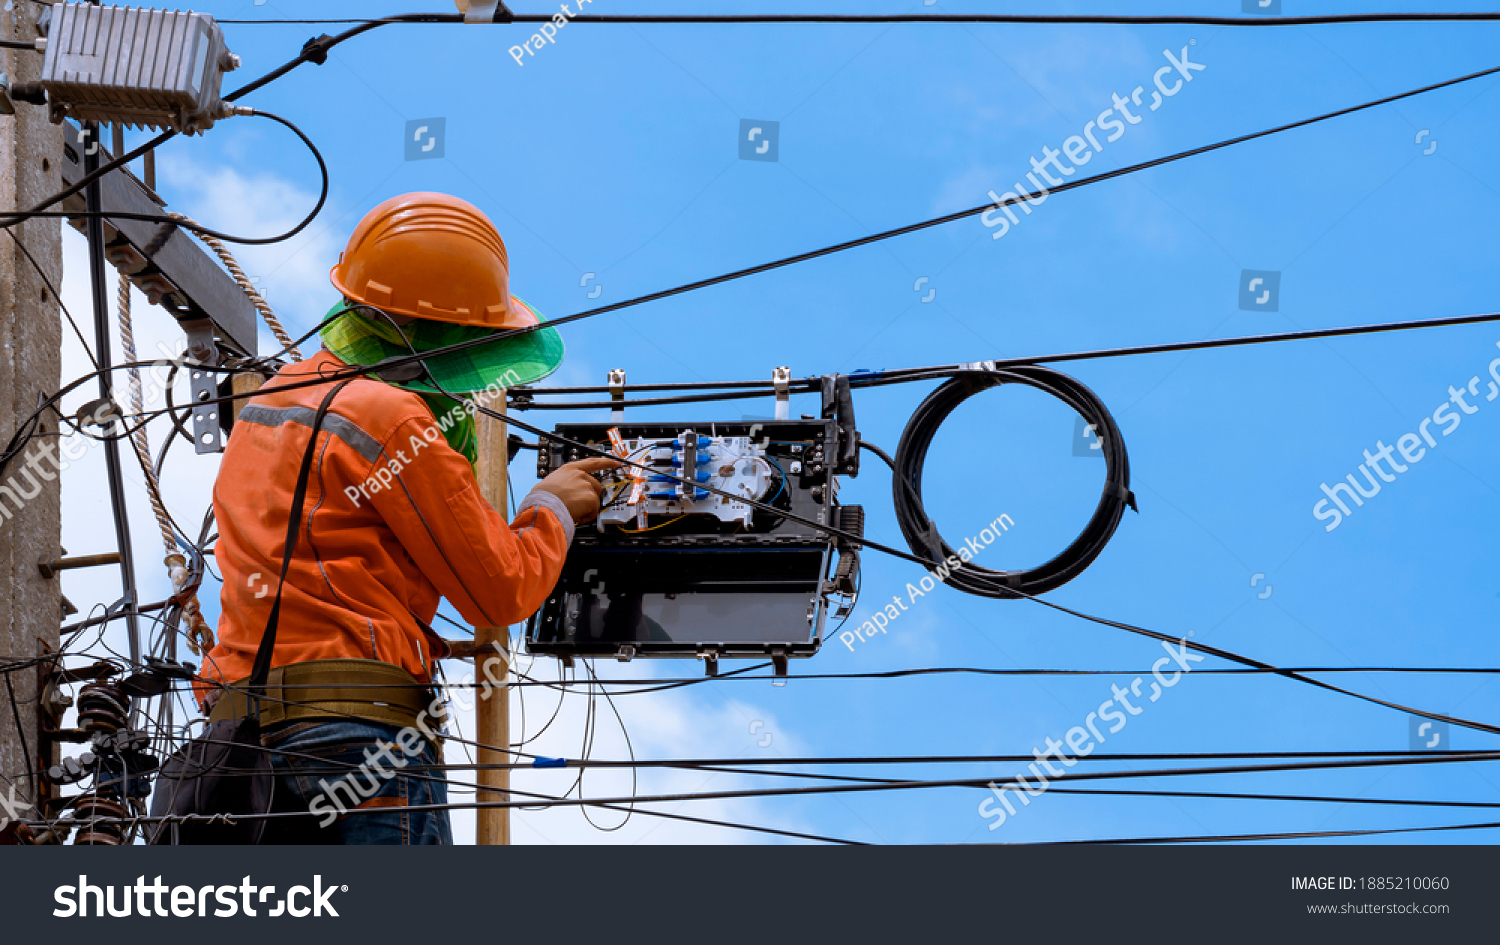 Rear view of technician on wooden ladder checking fiber optic cables in internet splitter box on electric pole against blue sky background #1885210060